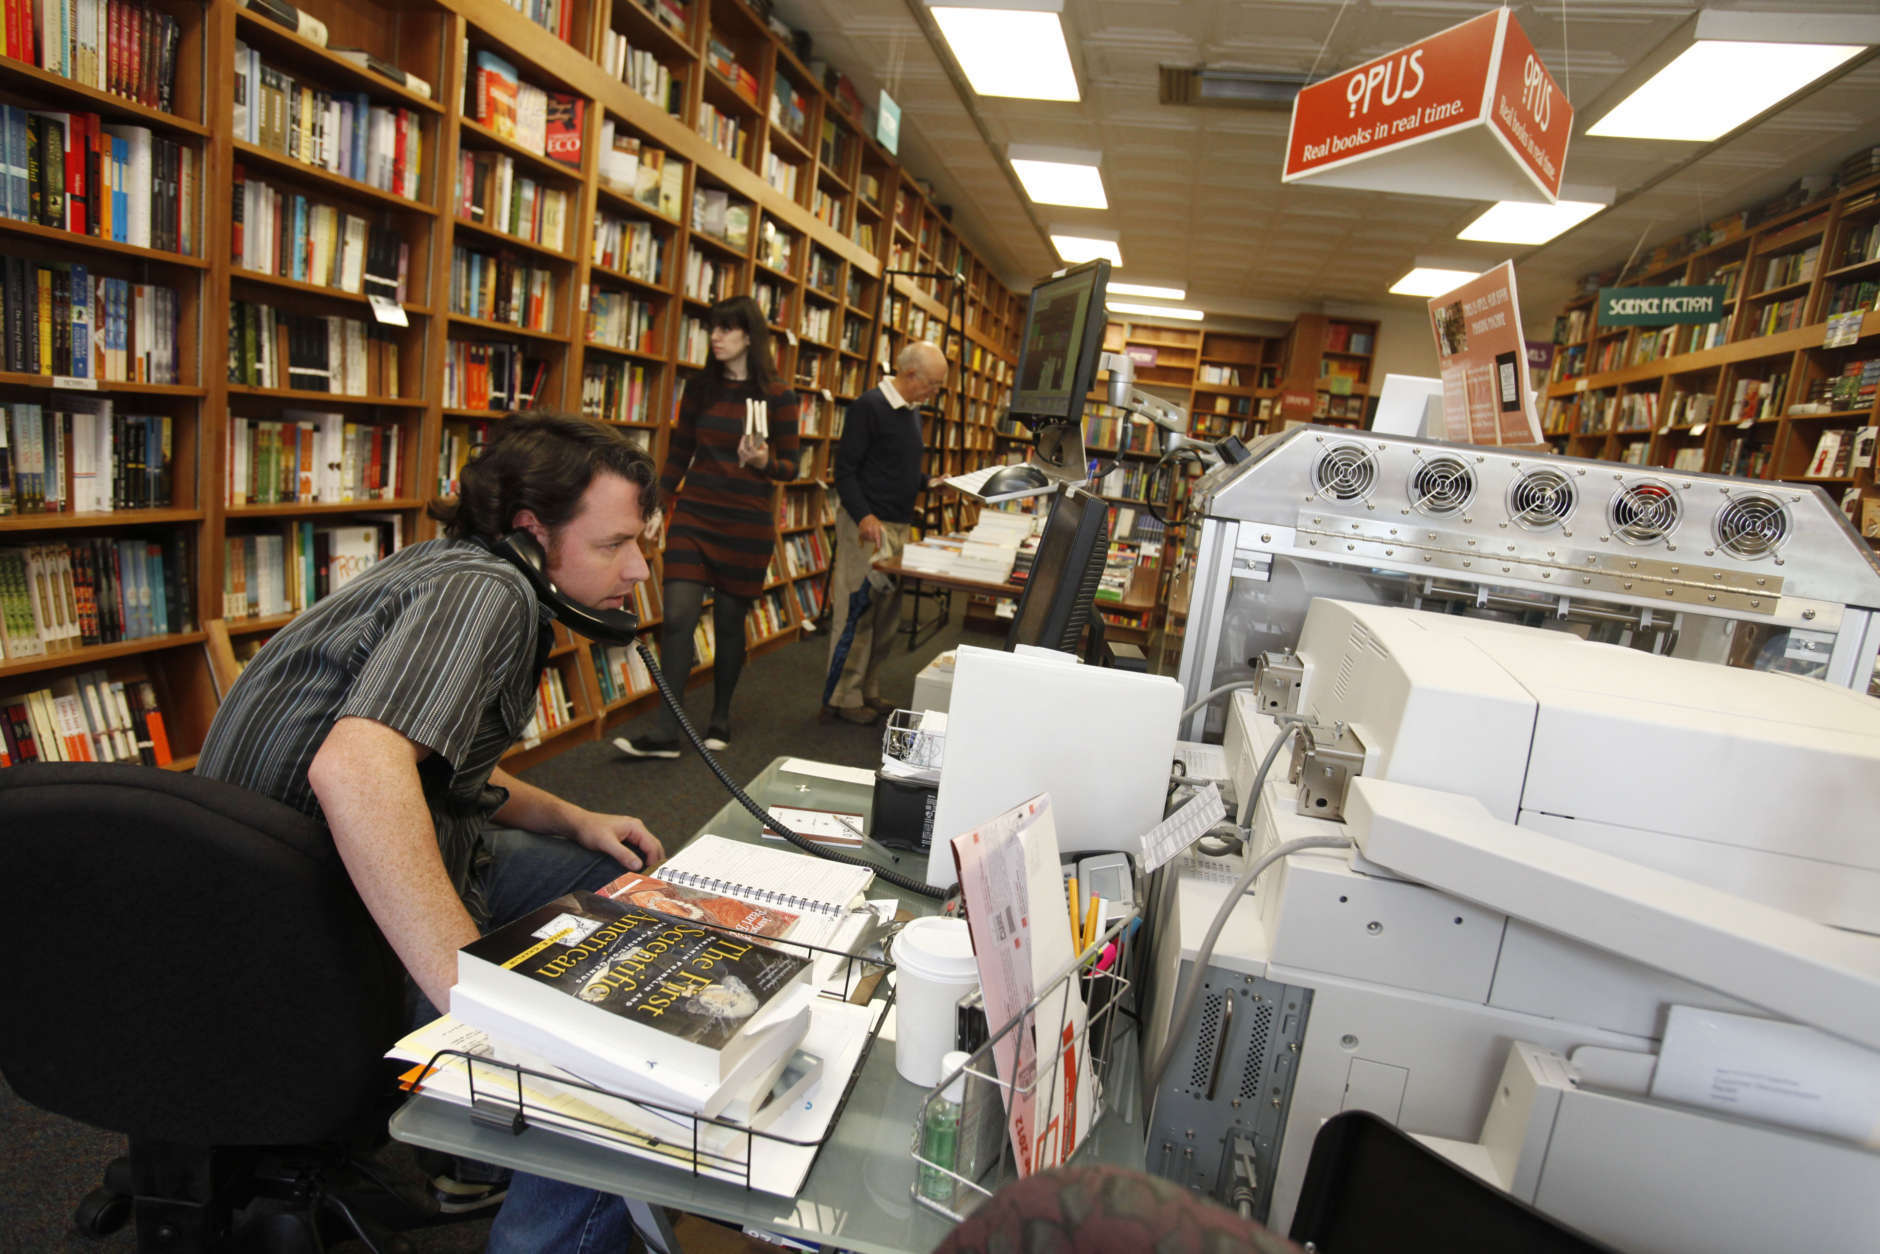 In this June 5, 2012, photo, Bill Leggett works on the Espresso Book Machine, known as Opus, at Politics and Prose bookstore in Washington. Self-publishing has been made easier since the macine by On Demand Books debuted in 2006. The machine also can makes copies of out-of-print editions. The first machine was installed briefly at the World Banks bookstore. Through a partnership with Xerox, the company now has machines in about 70 bookstores and libraries across the world including London; Tokyo; Amsterdam; Abu Dhabi, United Arab Emirates; Melbourne, Australia; and Alexandria, Egypt. (AP Photo/Jacquelyn Martin)